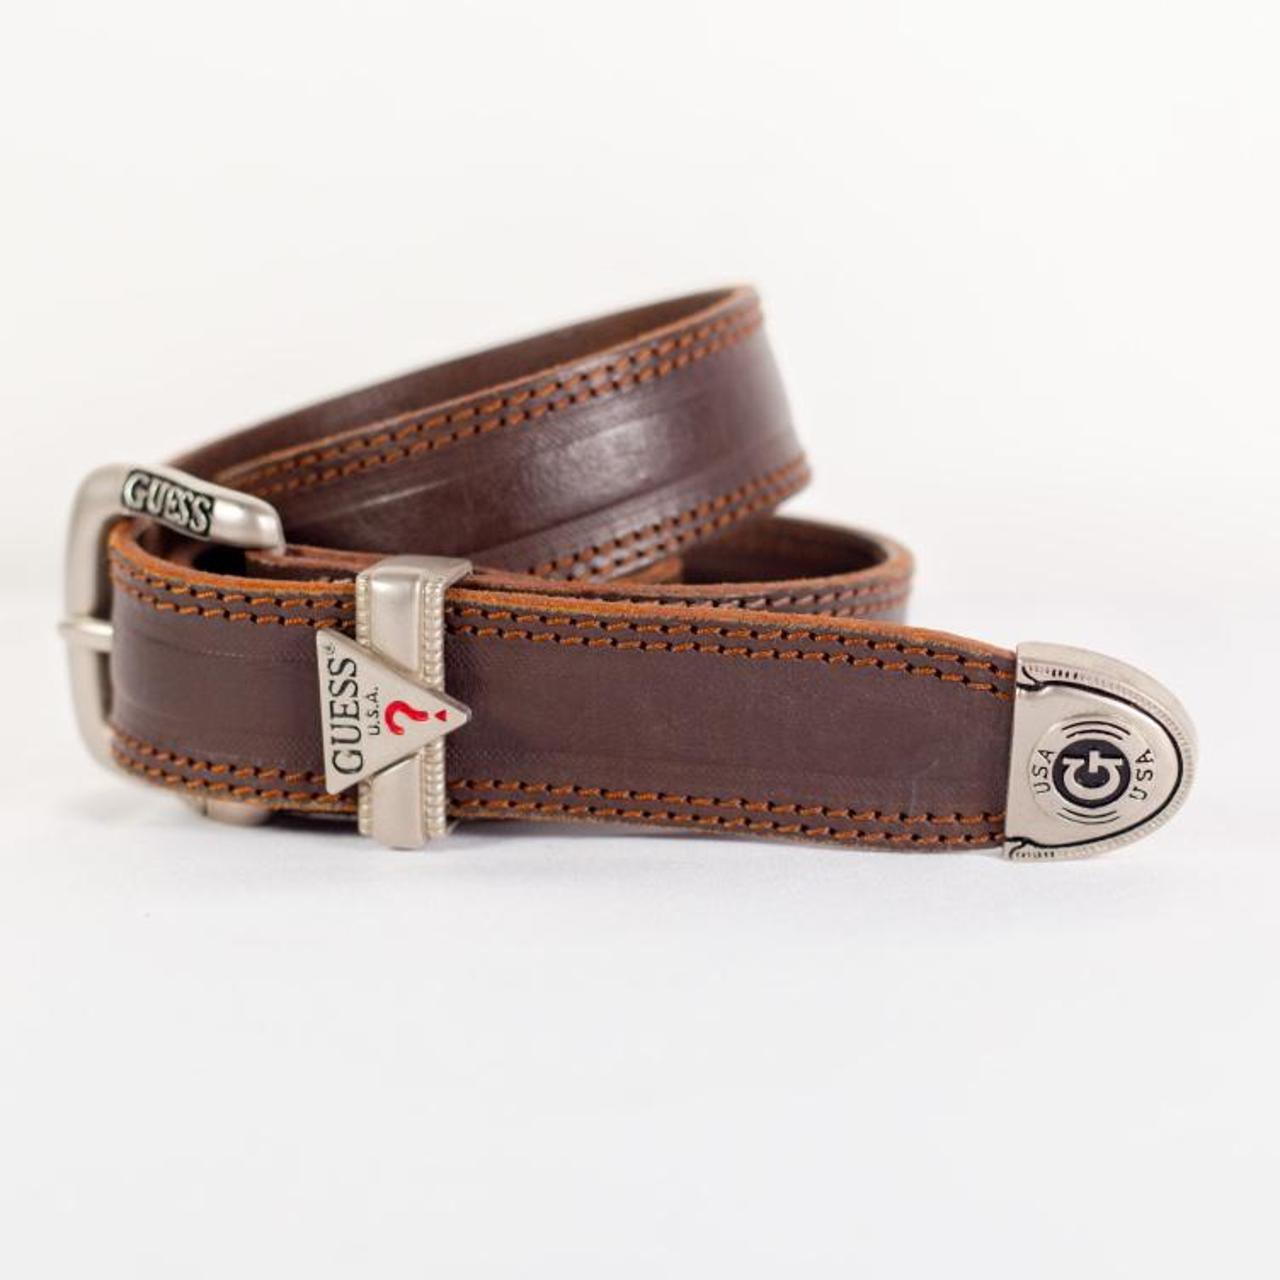 Product Image 1 - LEATHER GUESS BELT
2k Brown leather